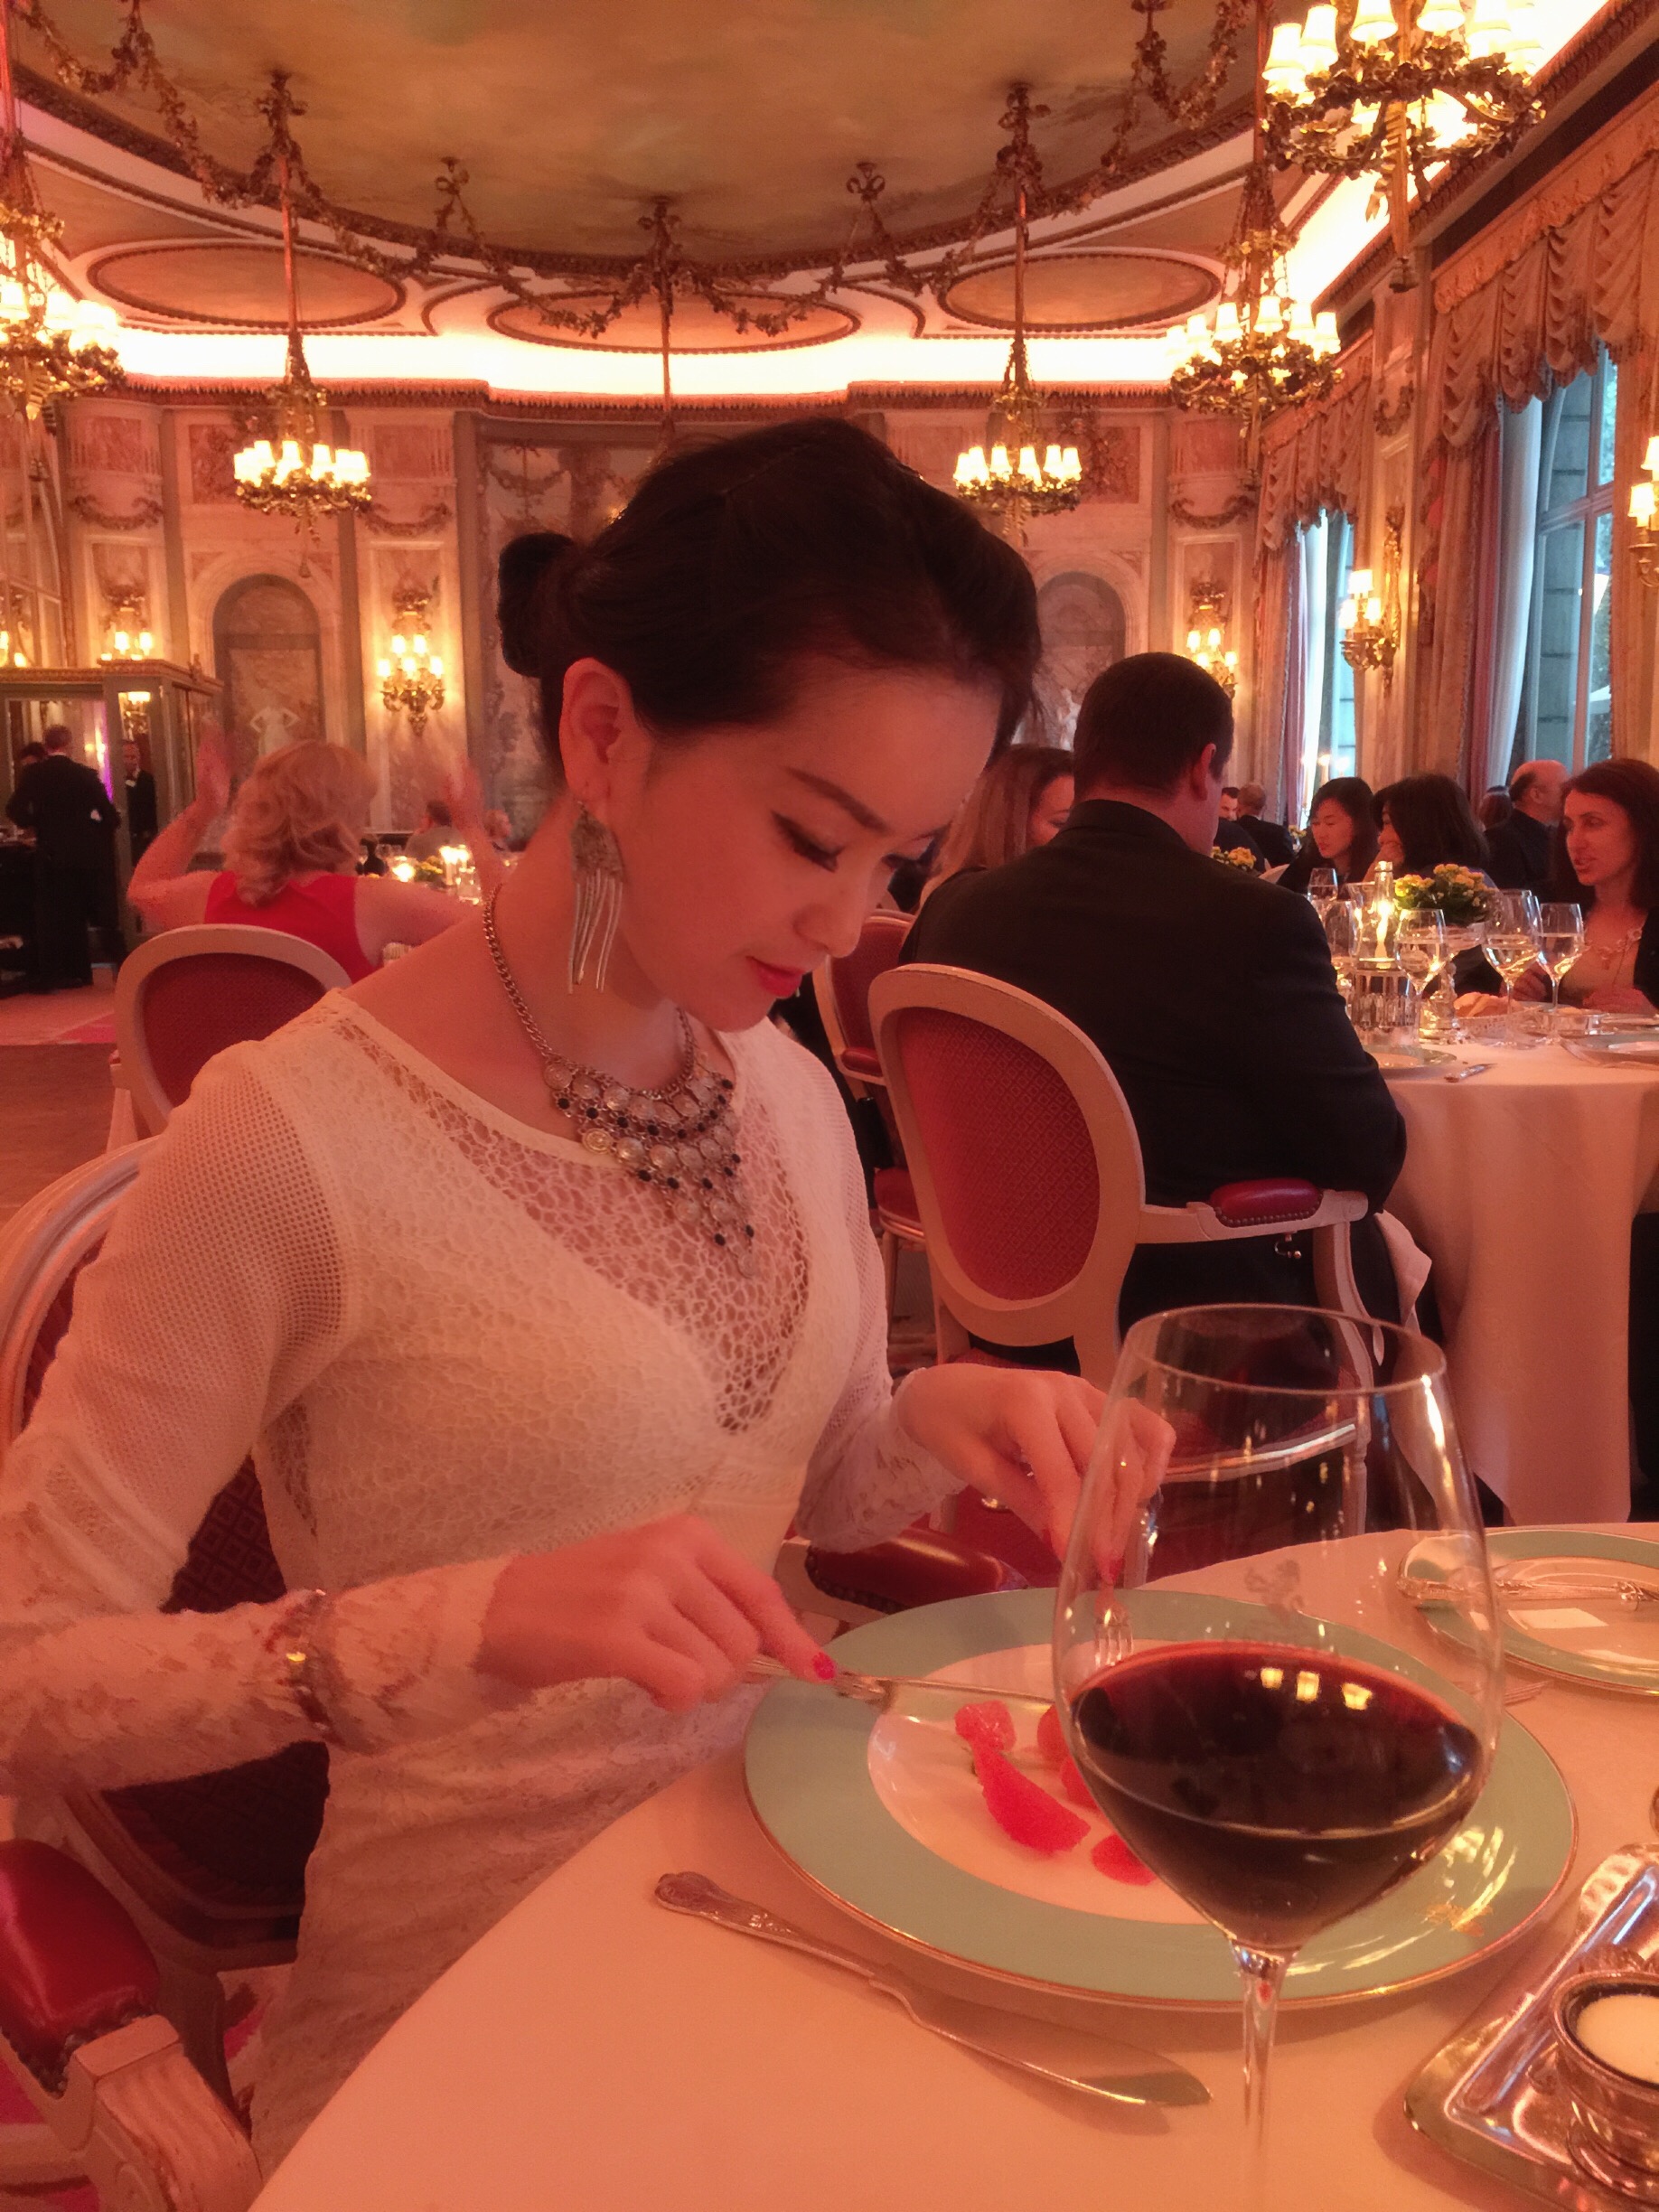 A Must Do in London: Afternoon Tea at The Ritz